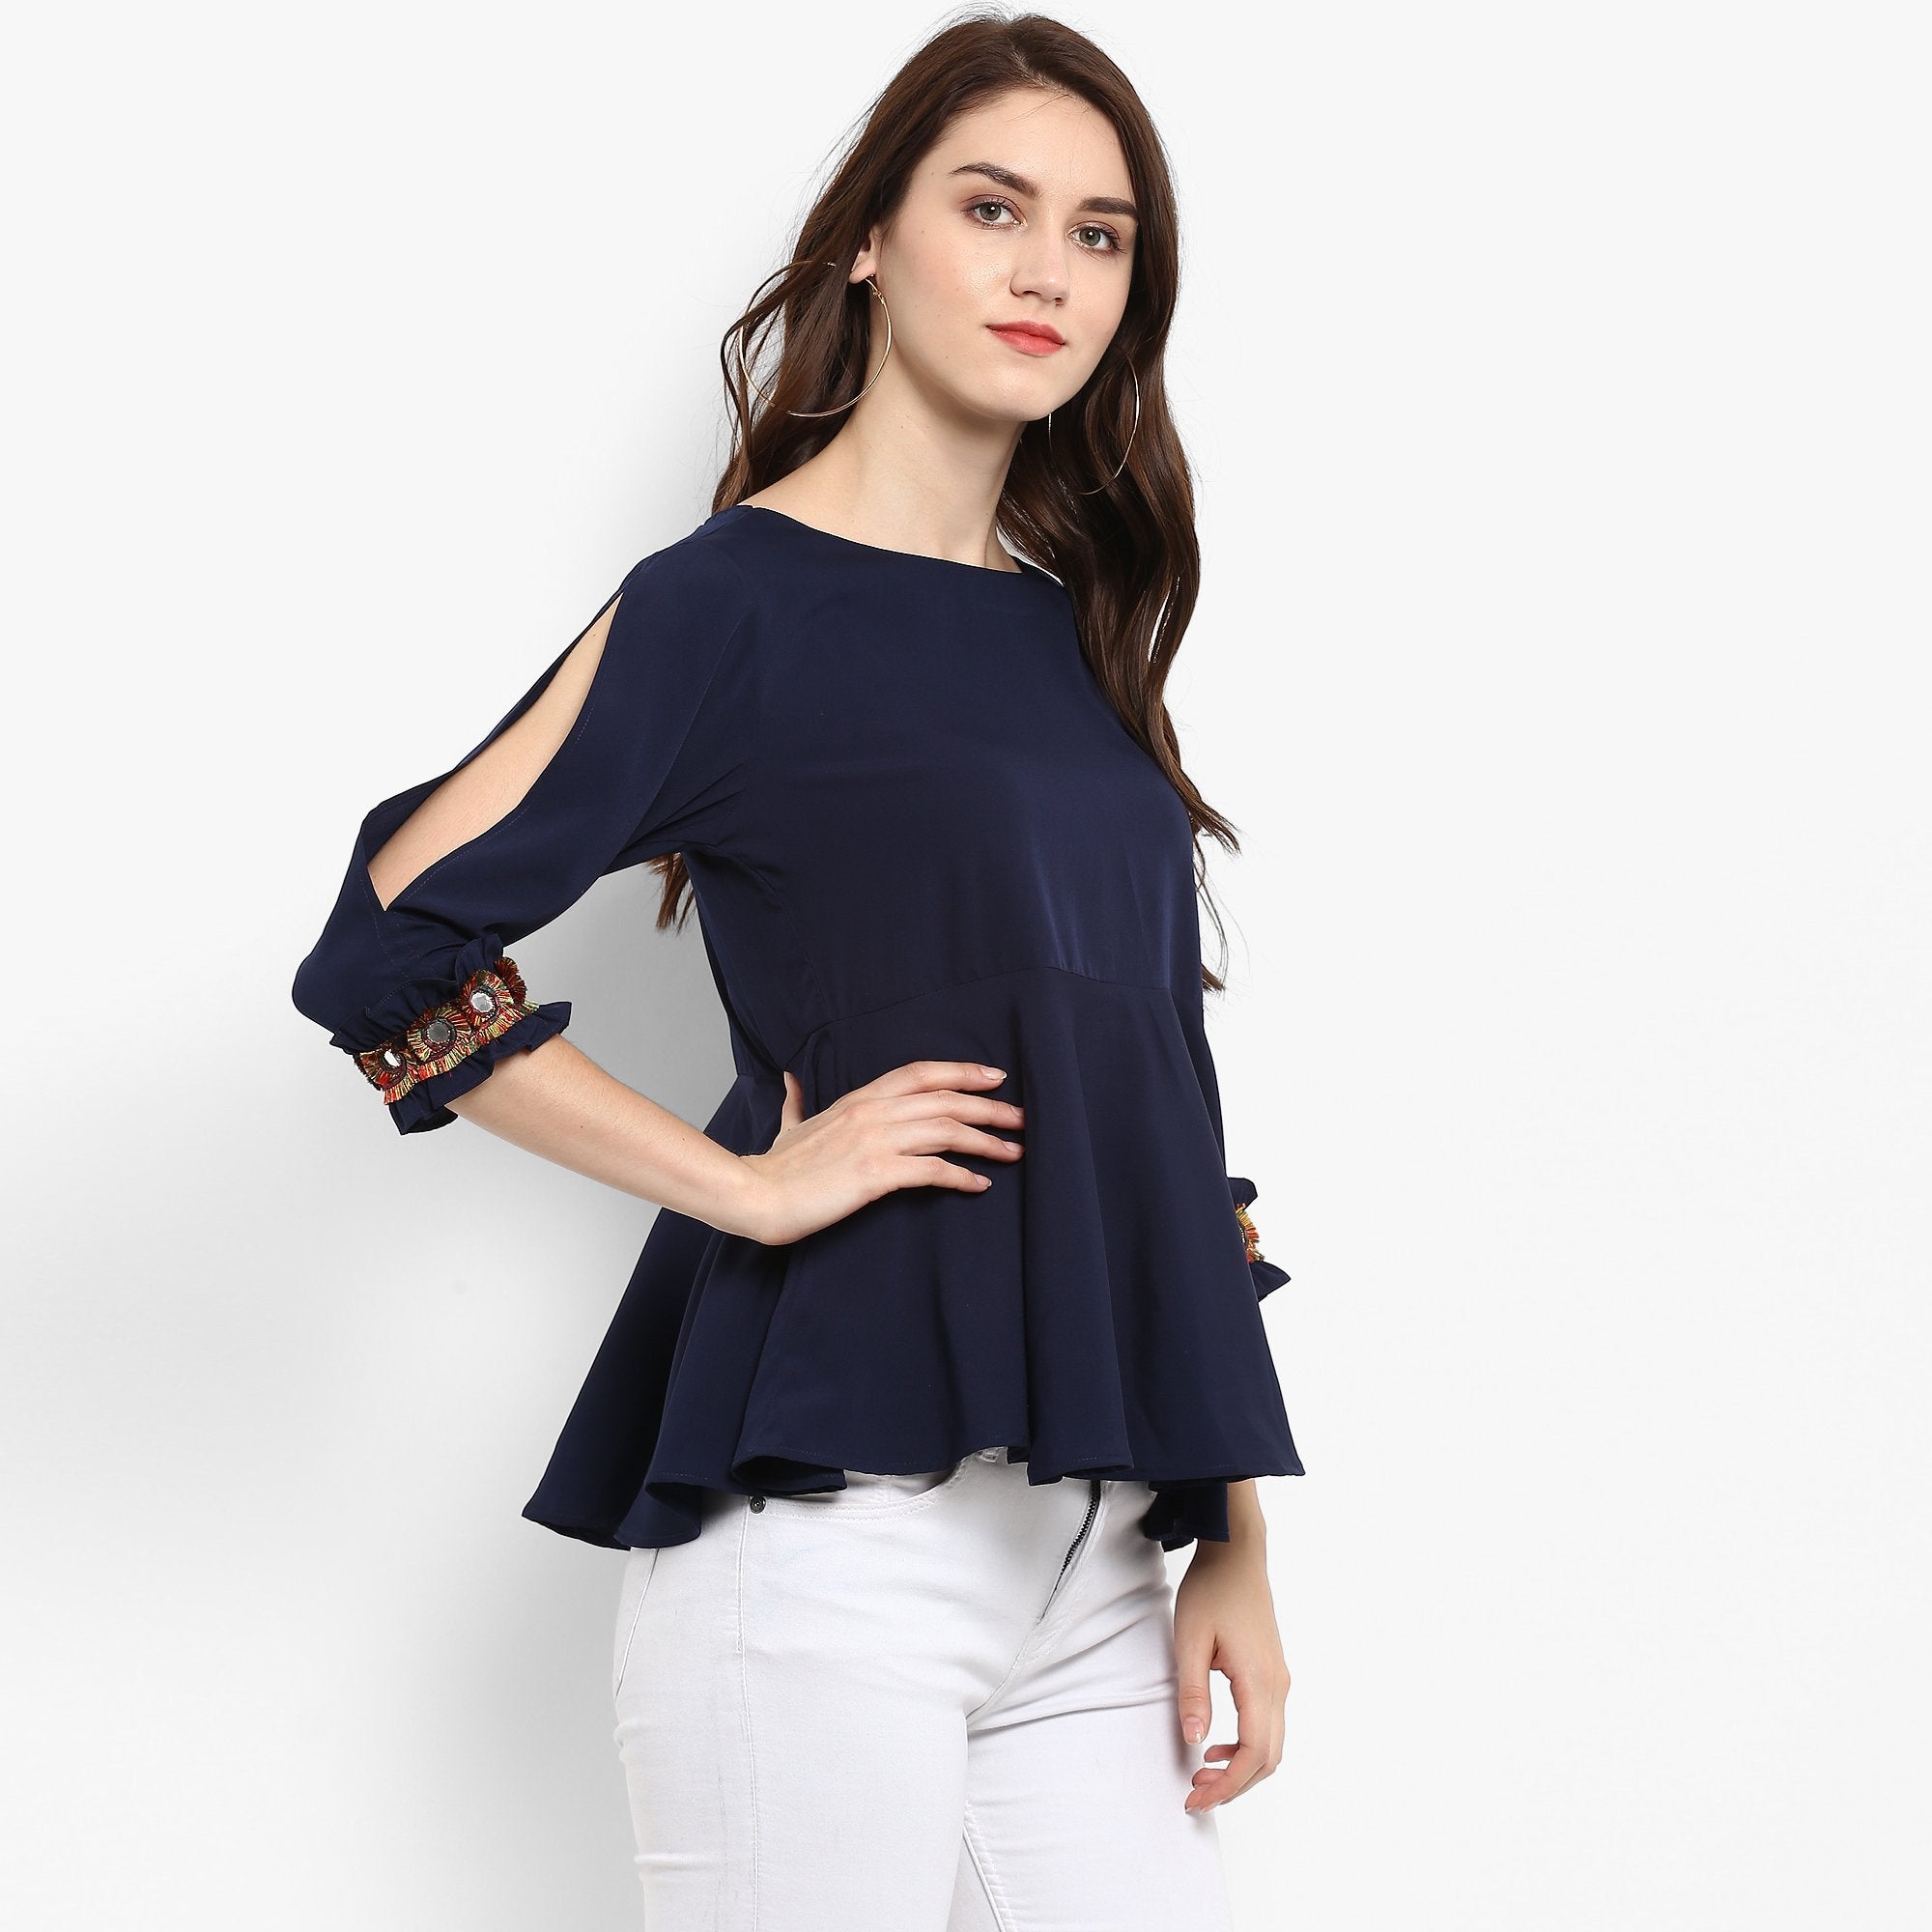 Women's Solid Peplum Top With Multi color Lace At The Sleeves - Pannkh